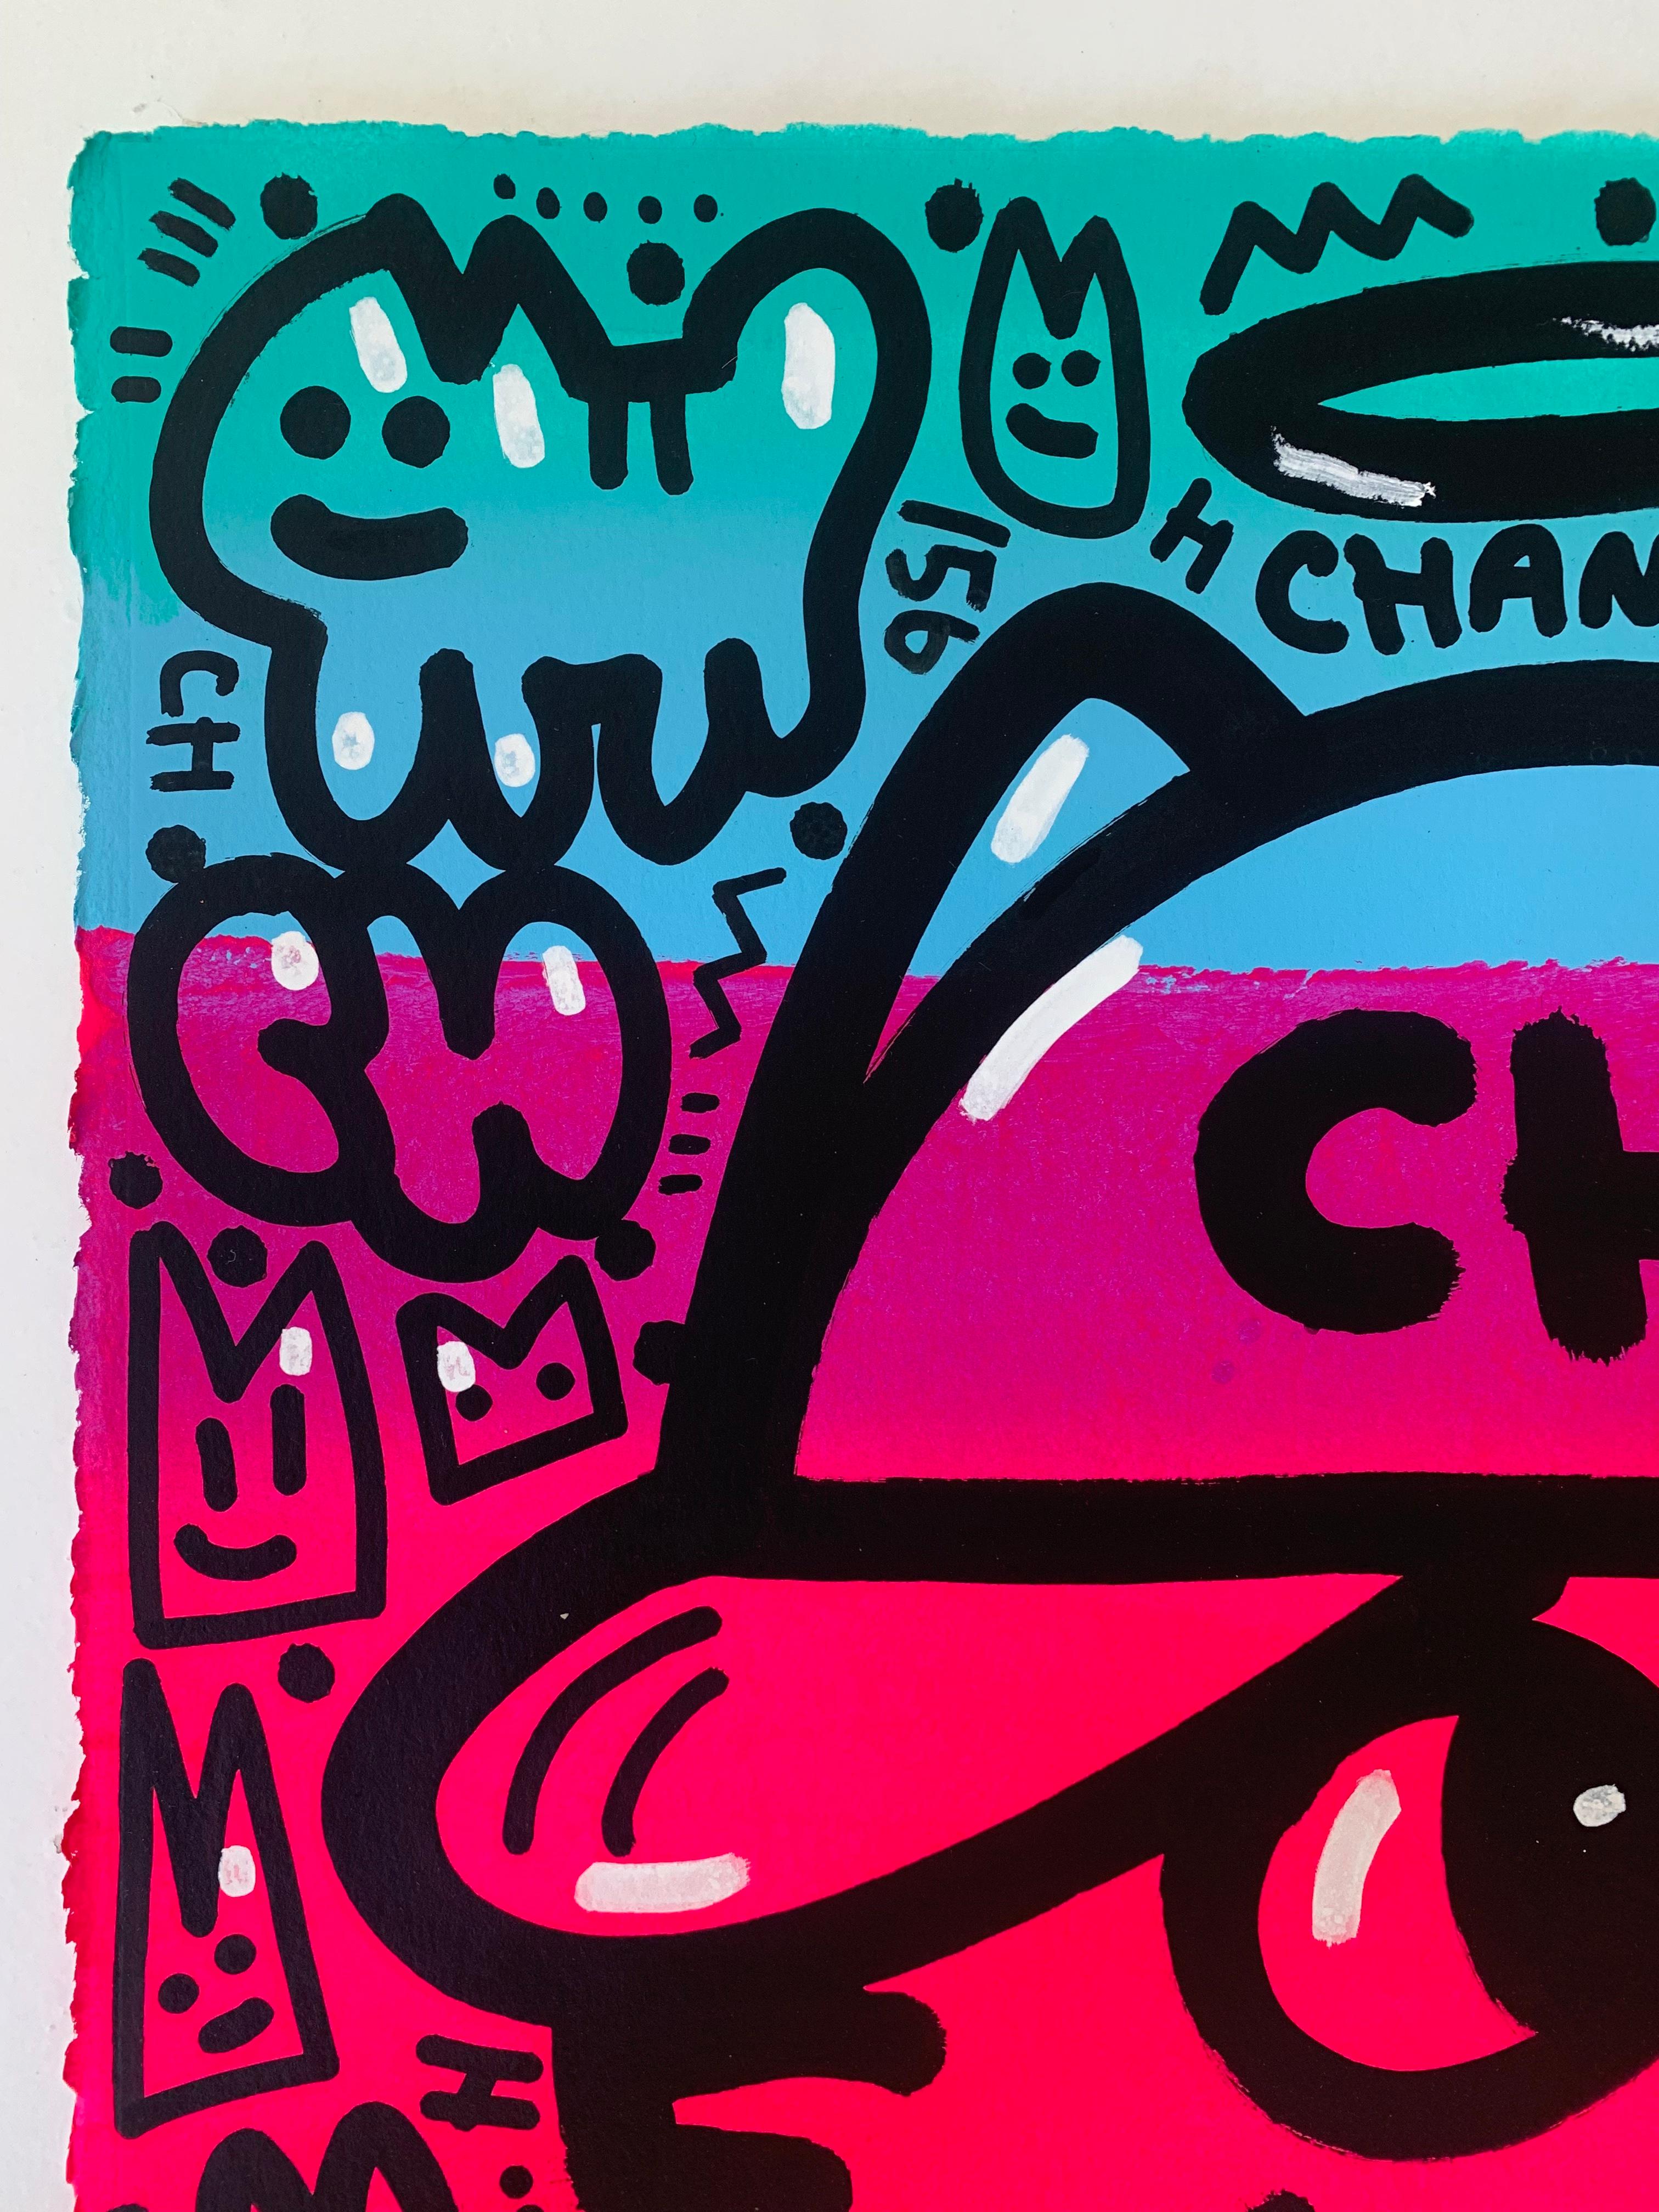 Alberto Vejarano, known as CHANOIR, is a French-Colombian artist born in 1976 in Bogotá. Internationally renowned, he is famous for the energy and optimism in his graffiti. CHANOIR works with a universal visual language, based on the belief that art